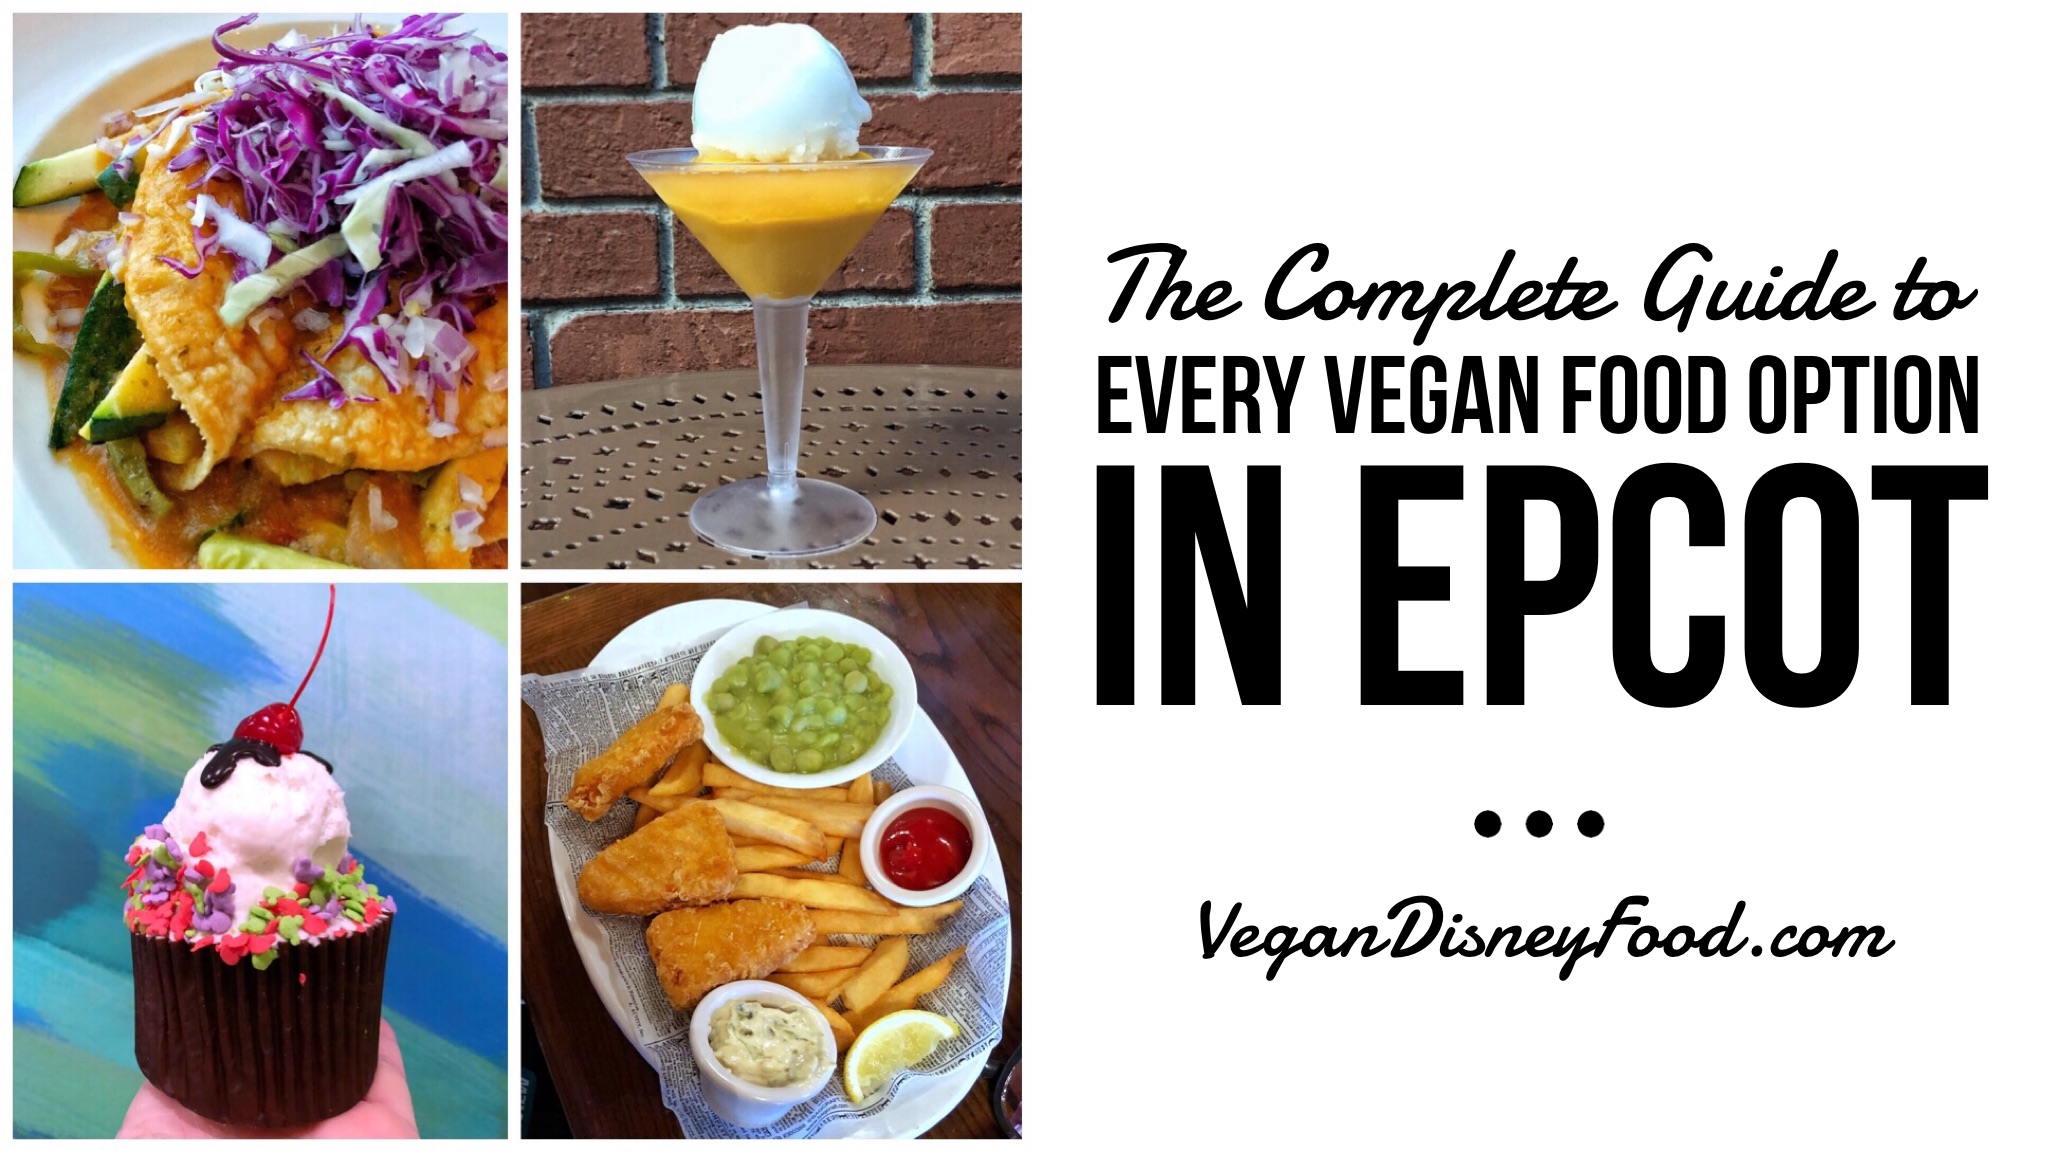 The Complete Guide to Every Vegan Option in Epcot at Walt Disney World